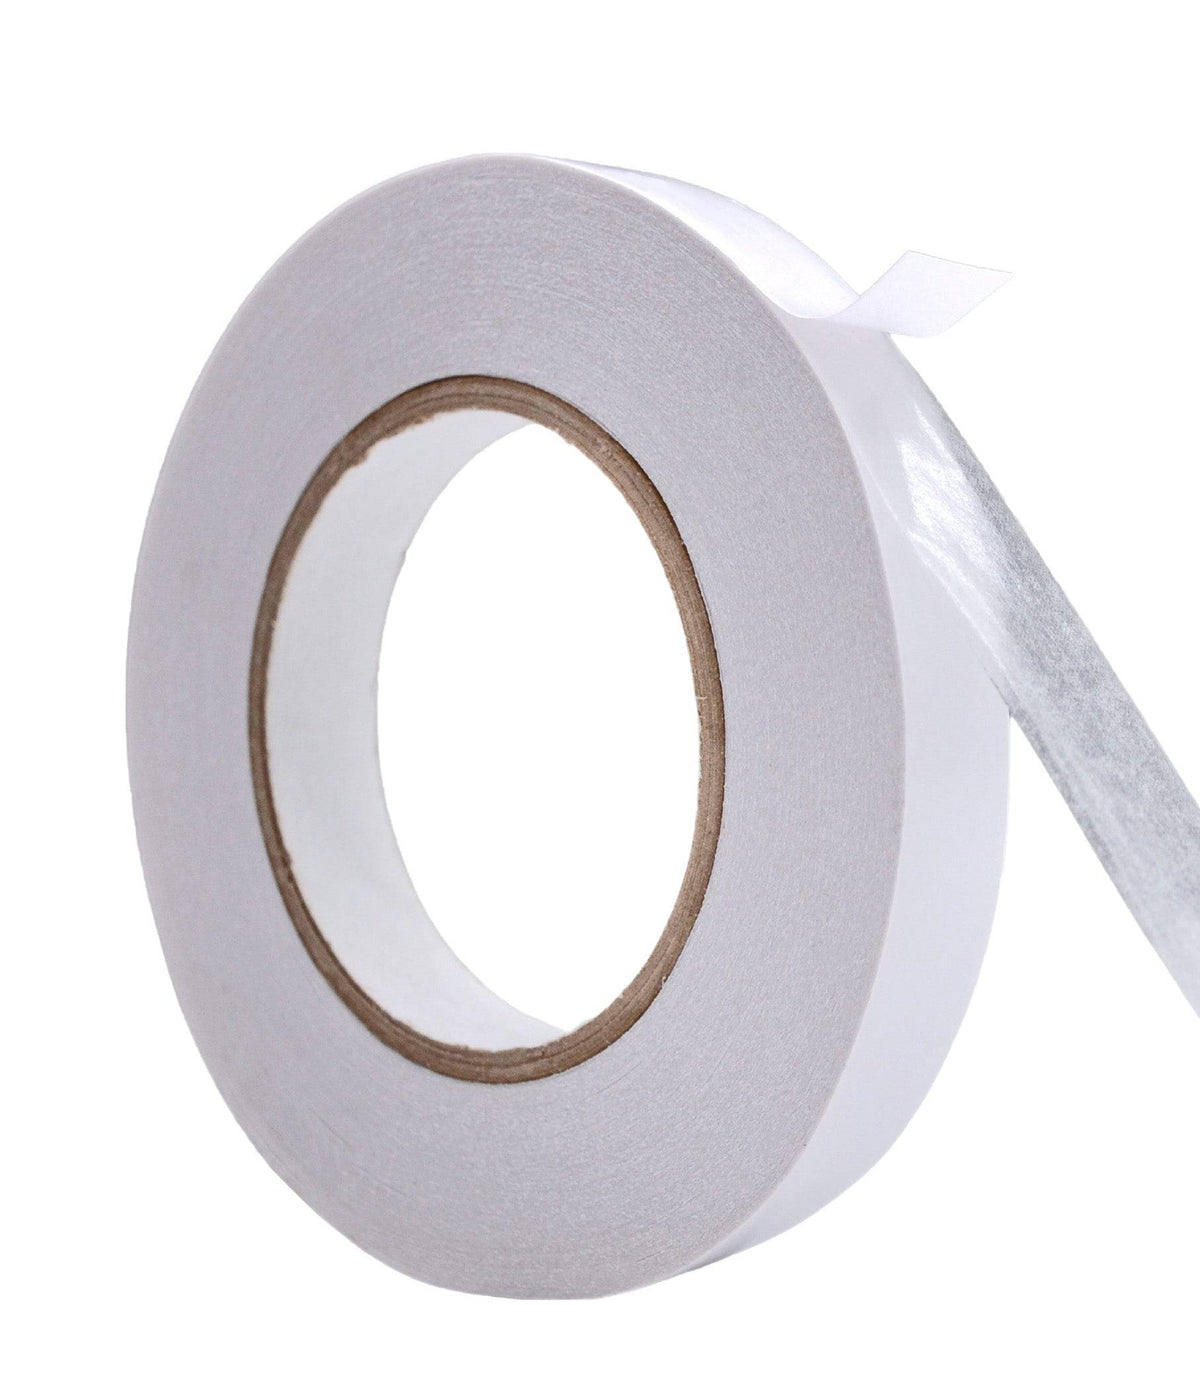 Double-sided Adhesive Tape For Hotels, Weddings, Carpets, Floors,  Waterproof, Traceless, Wall Socket, Non-damage Grid